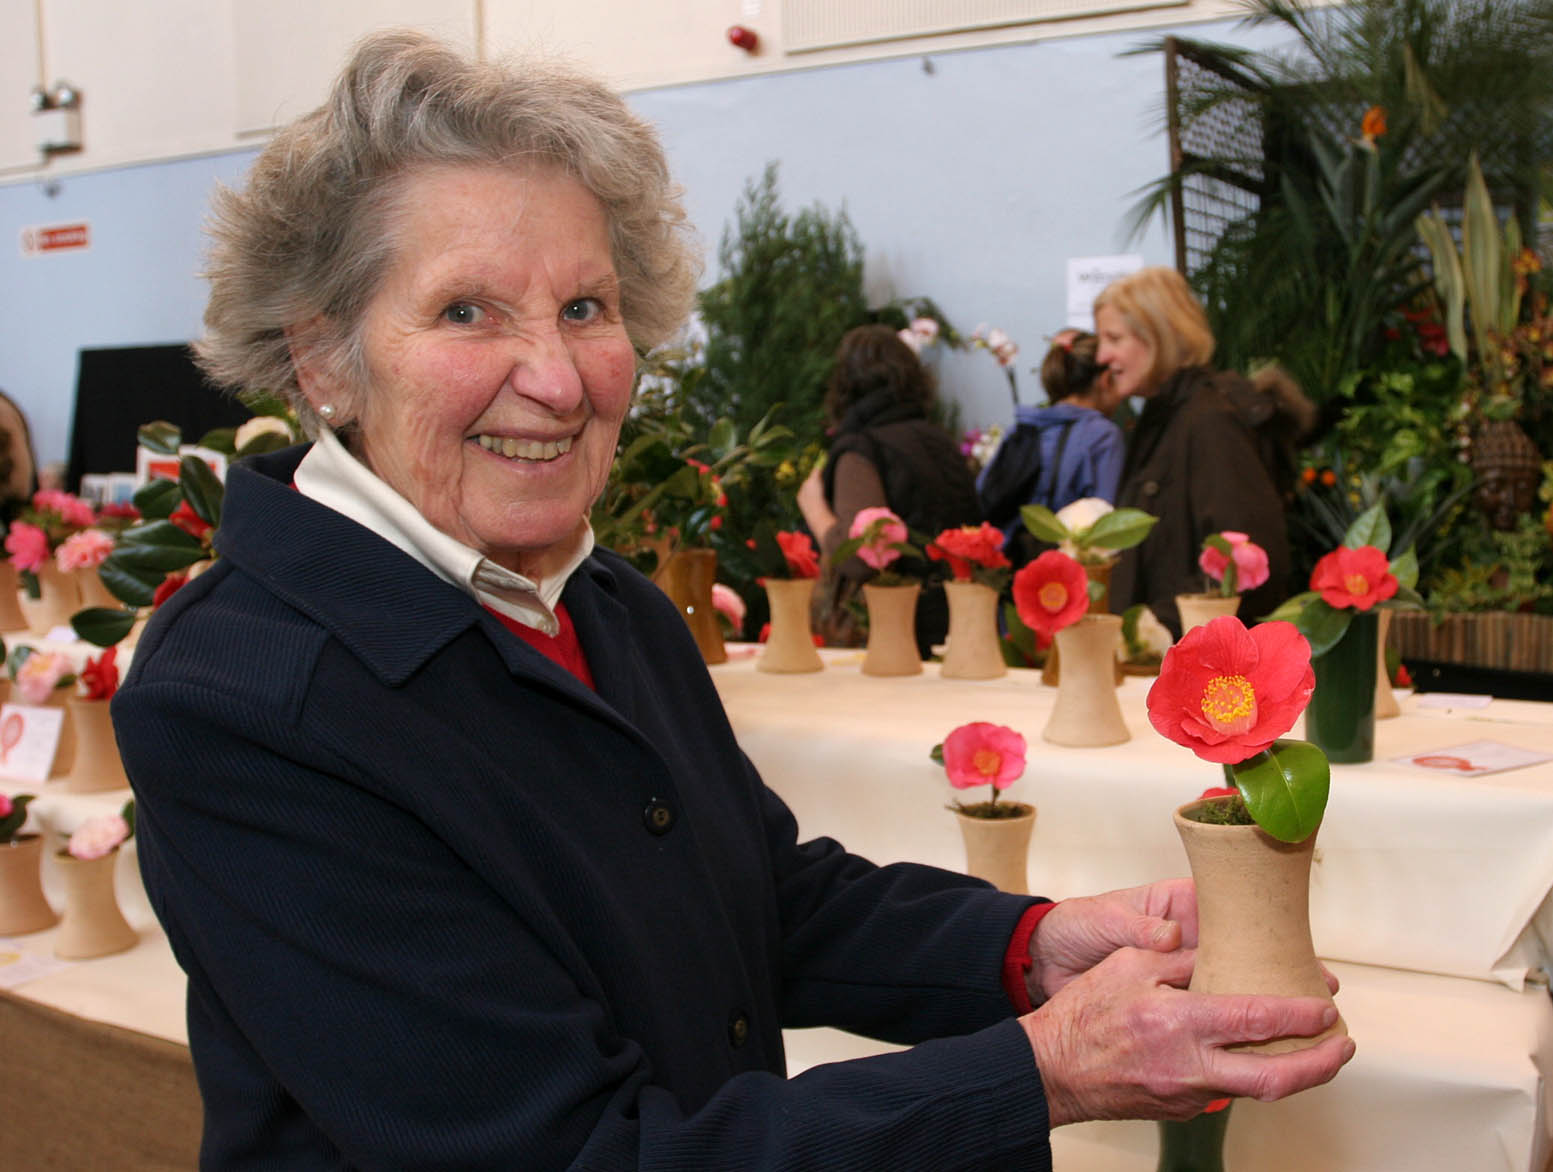 The 84th West Cornwall Spring Show organised by The West Cornwall Horticultural Society in St JohnÕs Hall Penzance. Elizabeth Bolitho with her 1st prize winning Camellia. Pic by Roger Pope/CIOSP